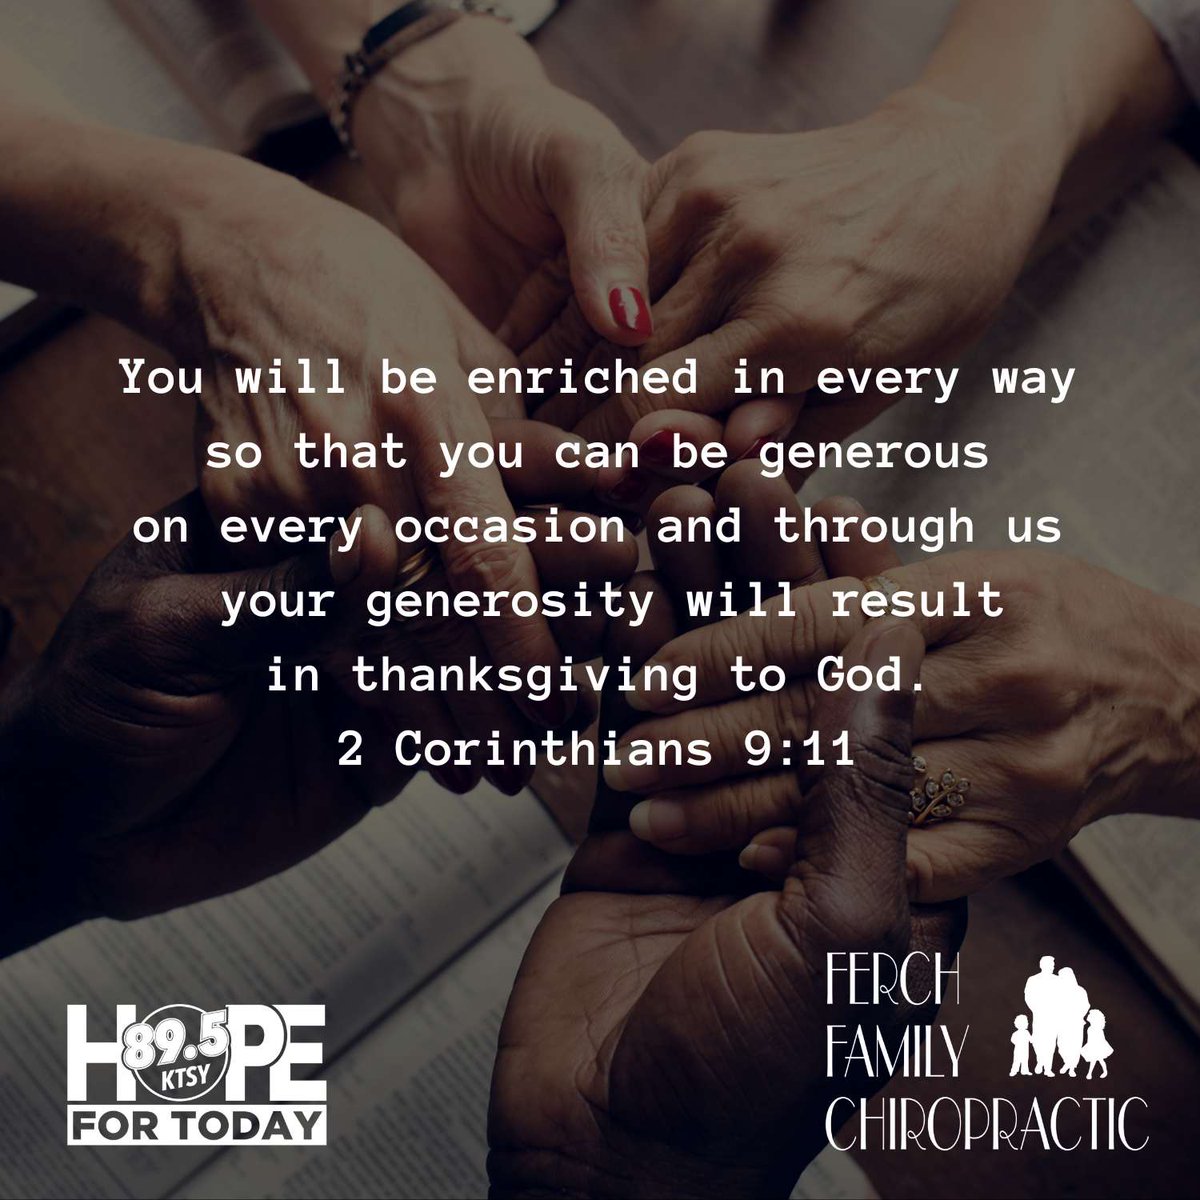 Your generosity makes a difference. #hopefortoday #choosehope #bible #scripture